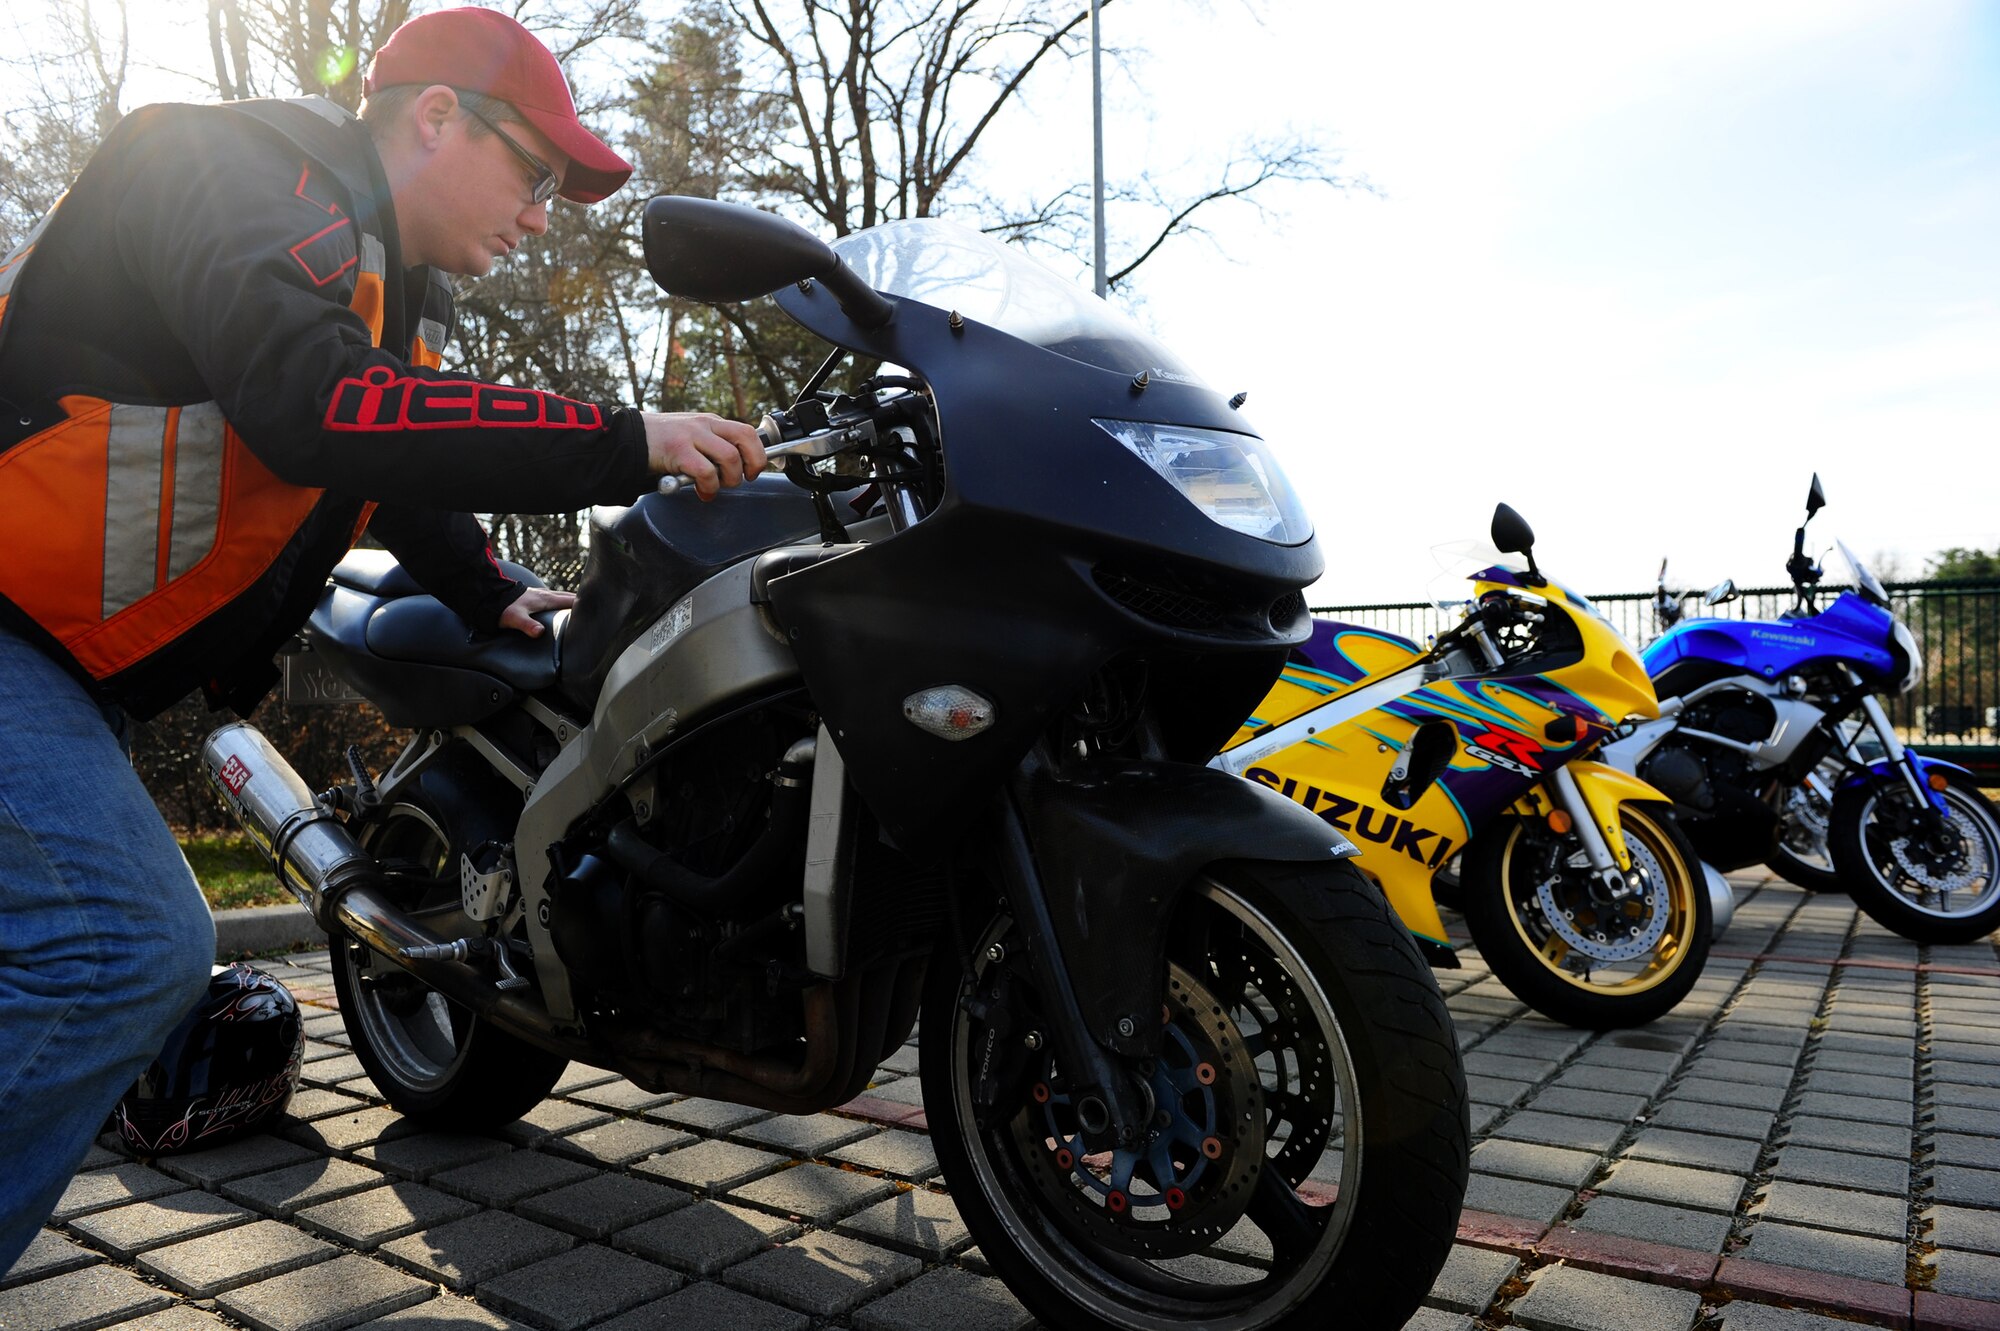 Senior Airmen Timothy Copple, 86th Aircraft Maintenance Squadron maintainer, inspects his motorcycle during Motorcycle Safety Day, Ramstein Air Base, Germany, March 17, 2012. The safety day was held for the 86th Maintenance Group to promote safe motorcycle practices and raise camaraderie amongst the participants. (U.S. Air Force photo/Airman Brea Miller)